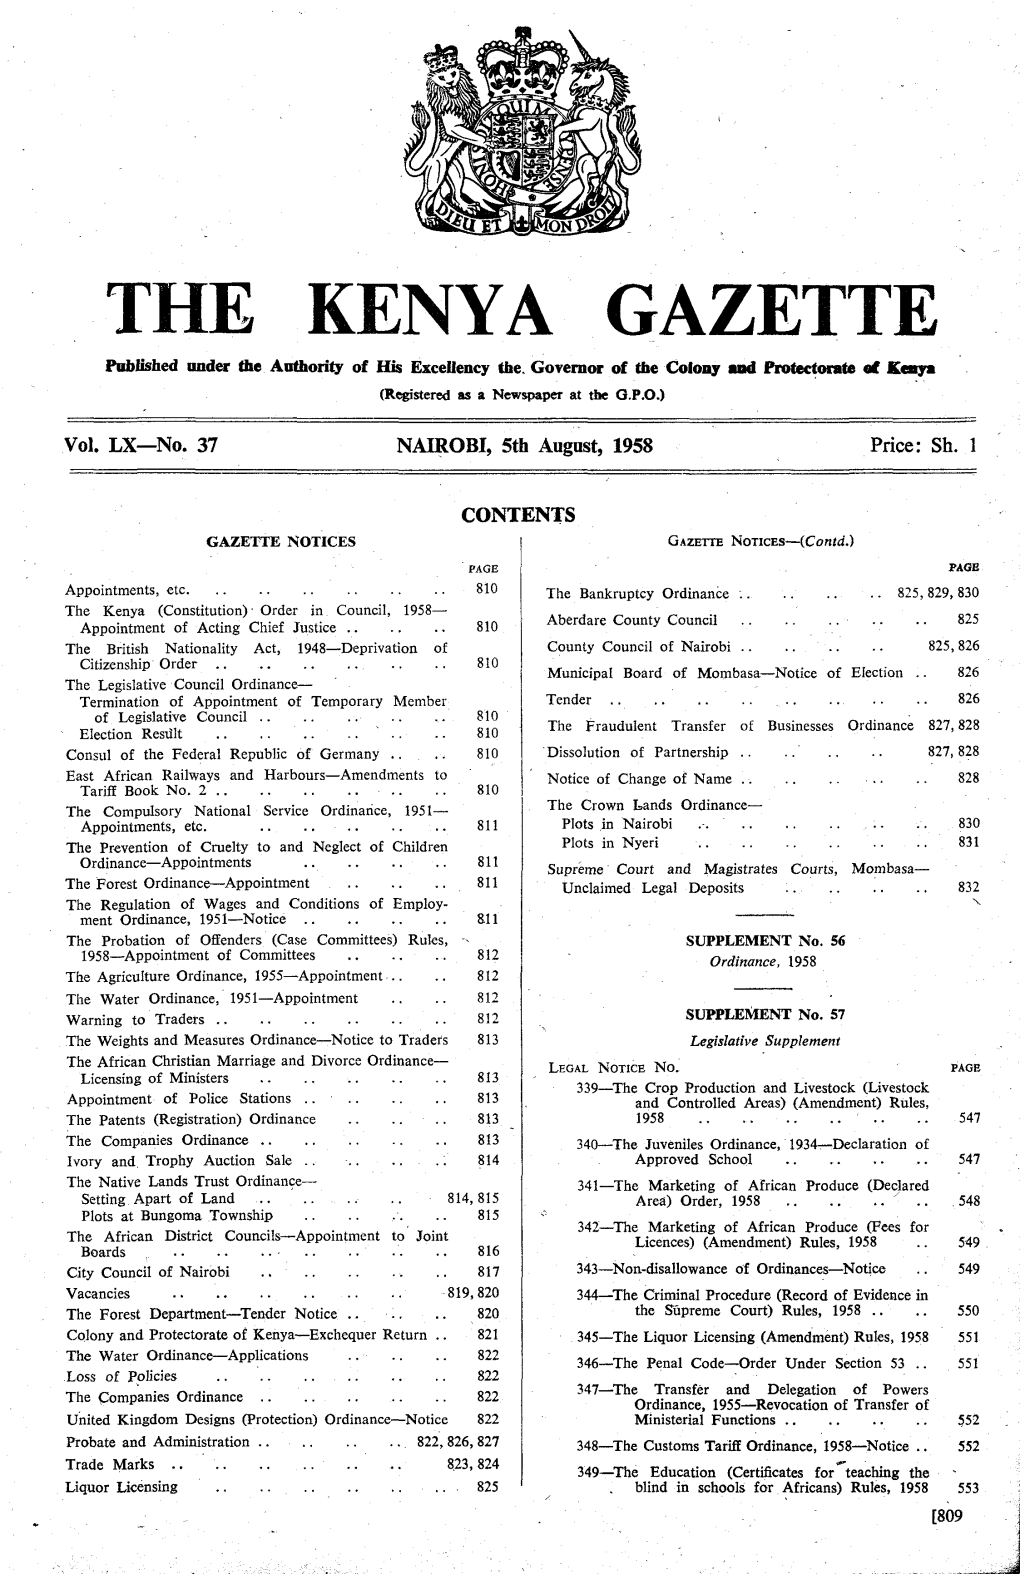 THE KENYA GAZETTE Published Under the Authority of His Excellency The